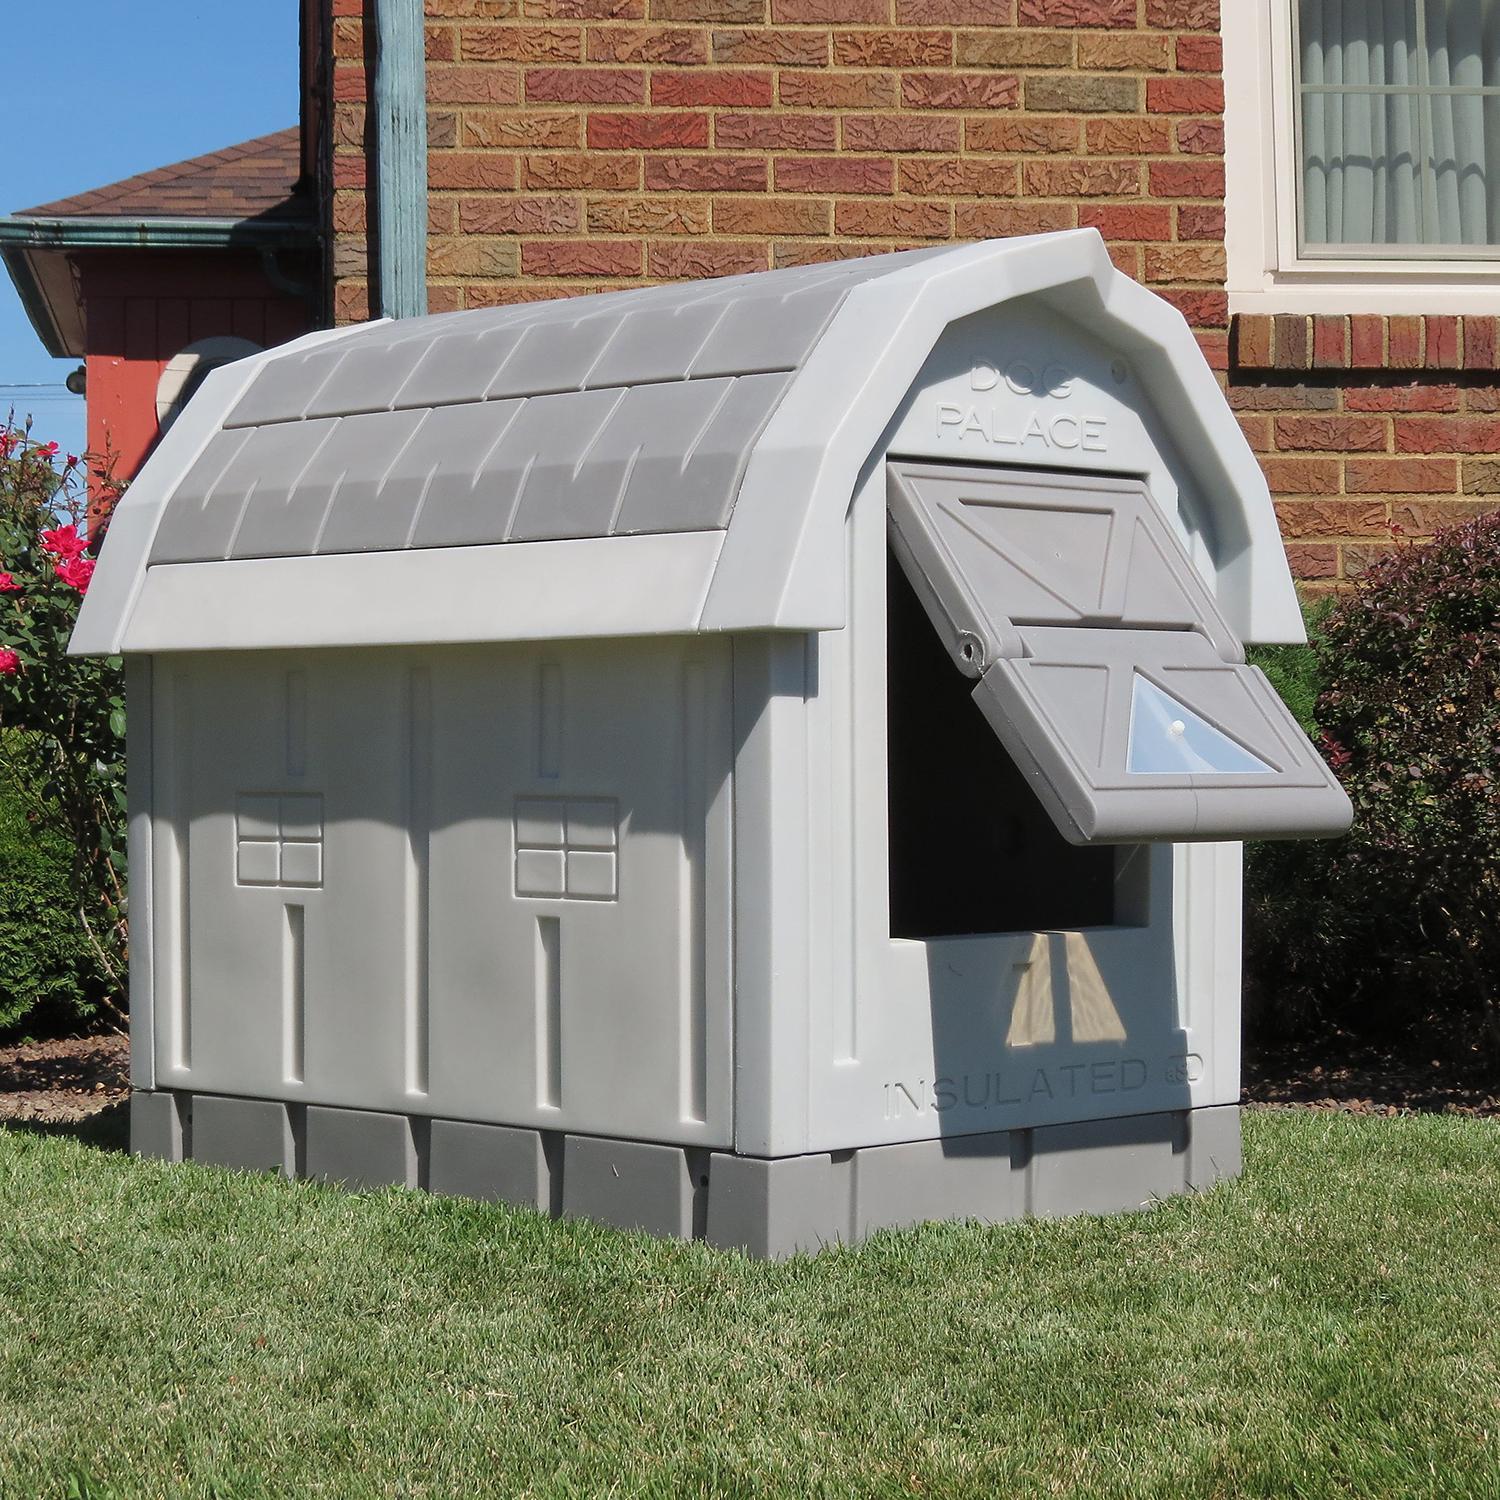 Insulated Dog house with door - gray